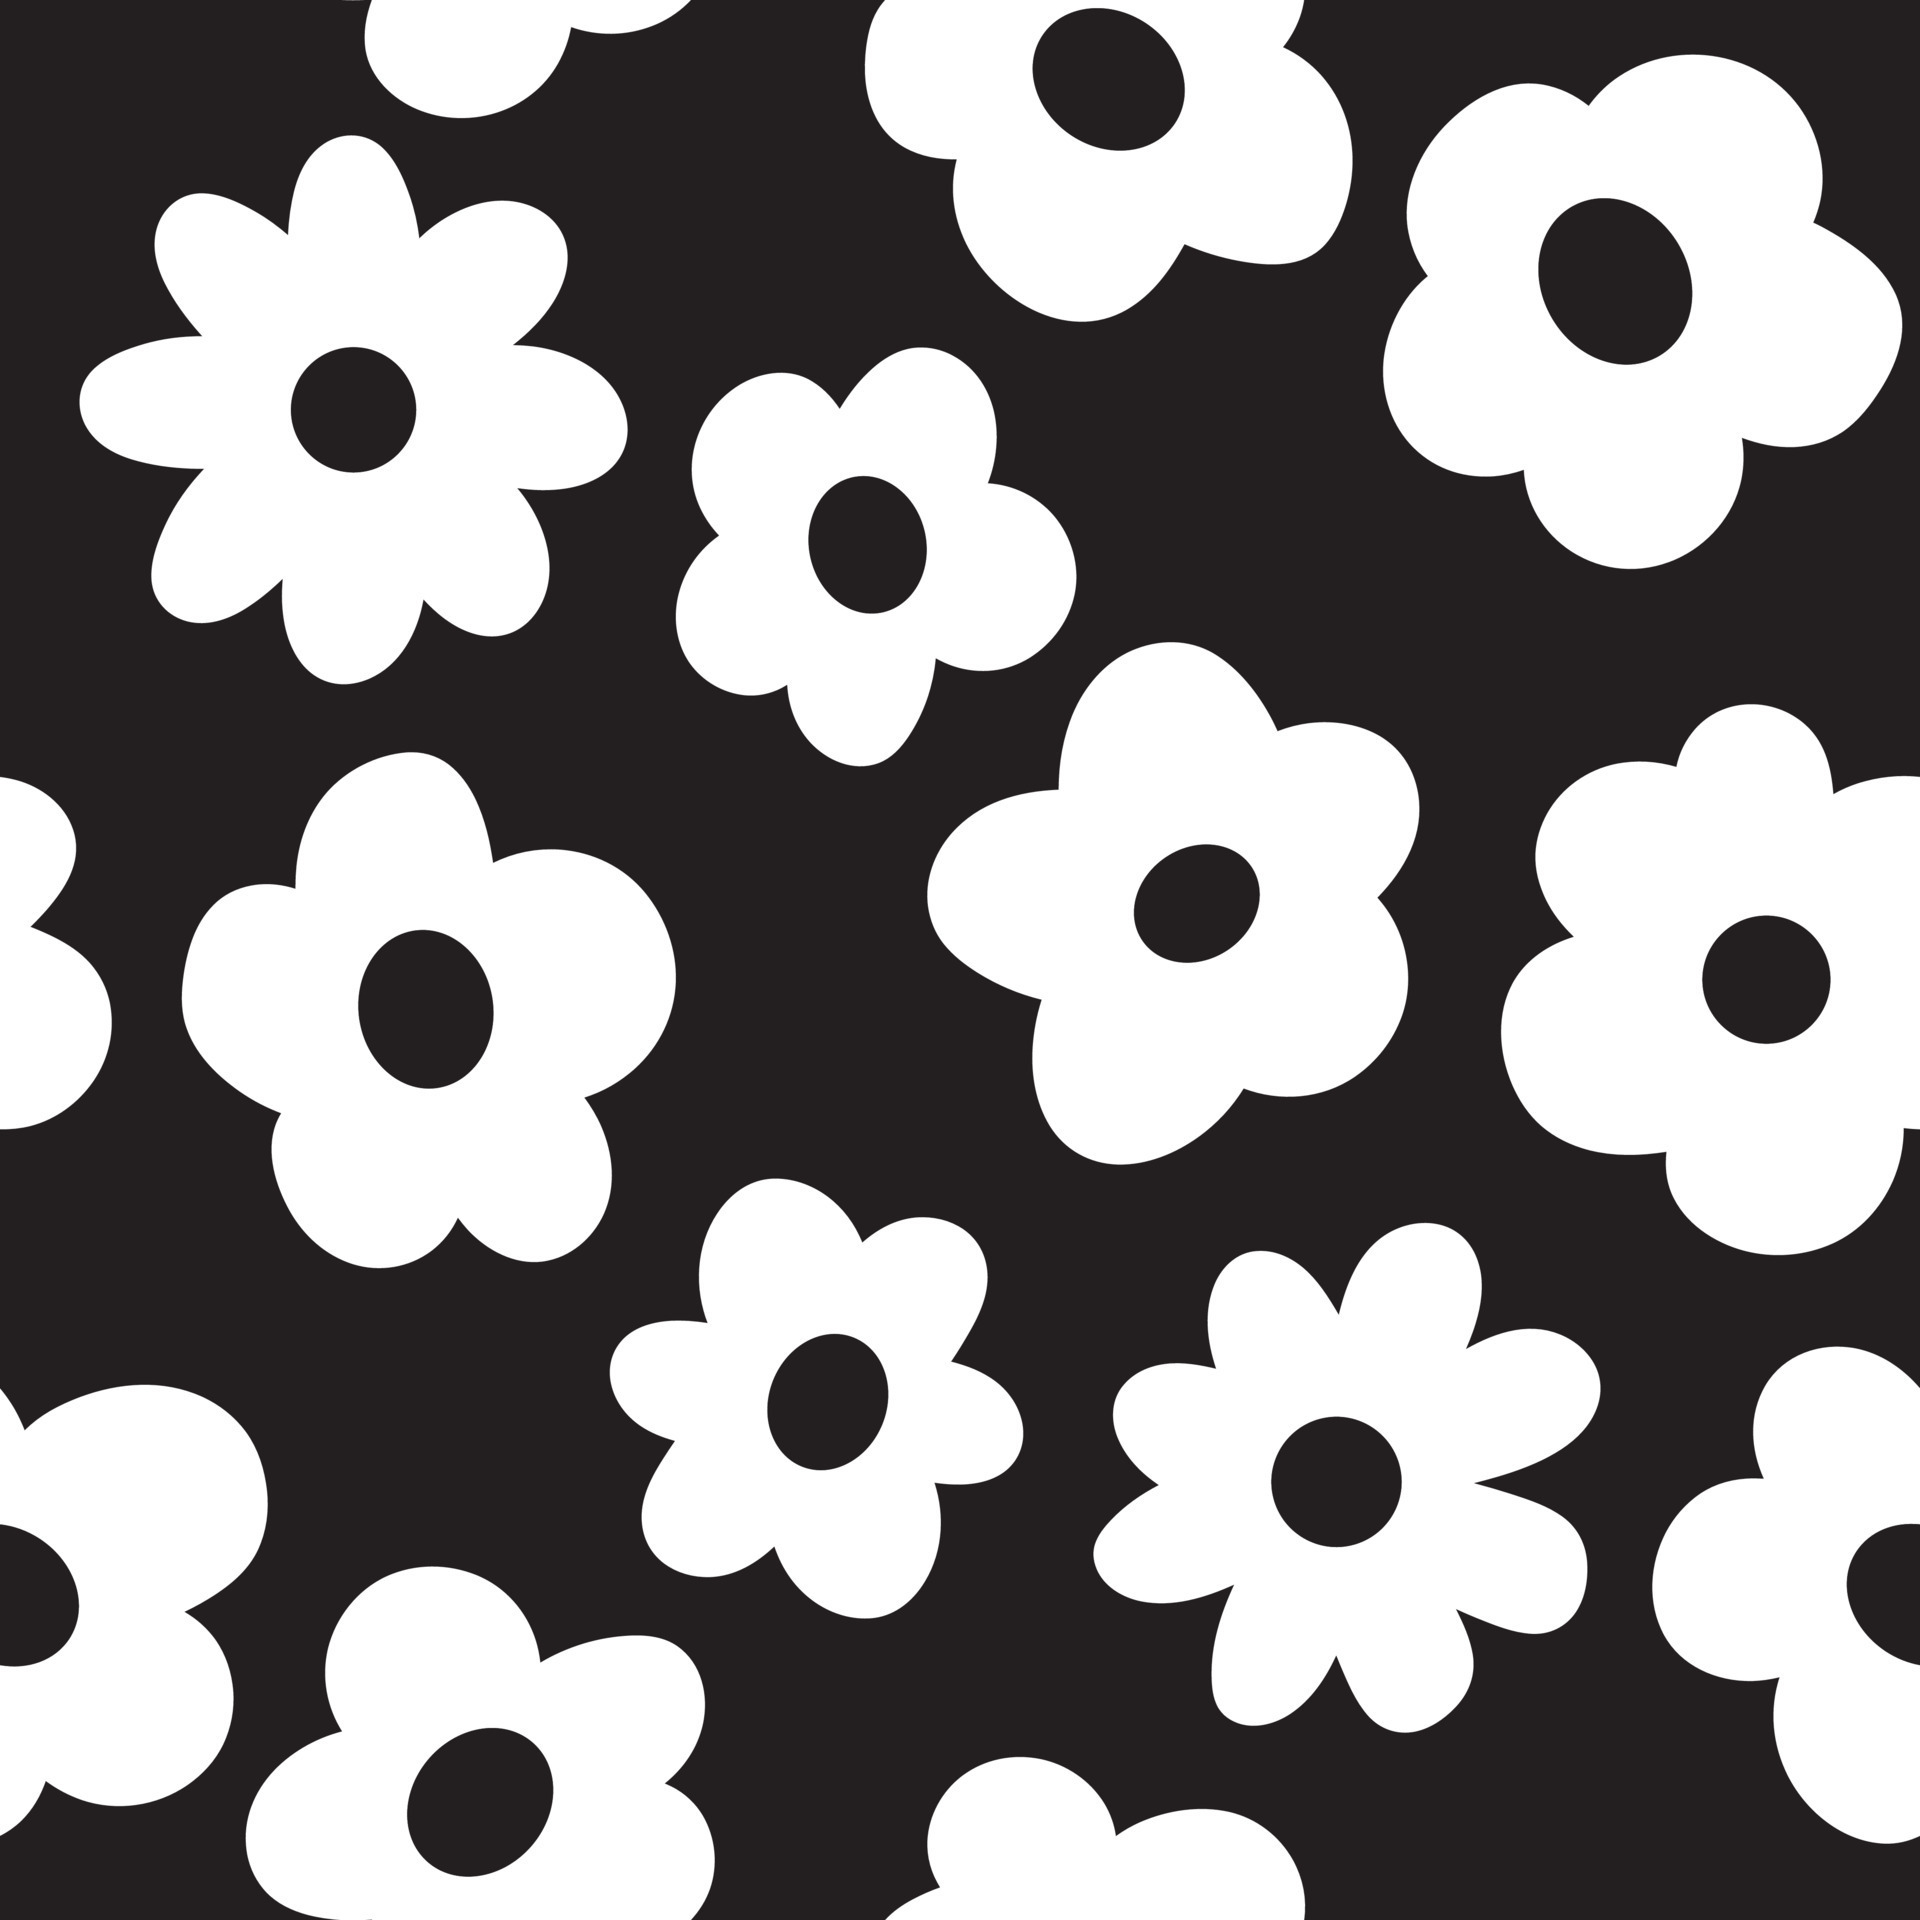 Black and White Cartoon Flowers Background, Seamless Pattern EPS